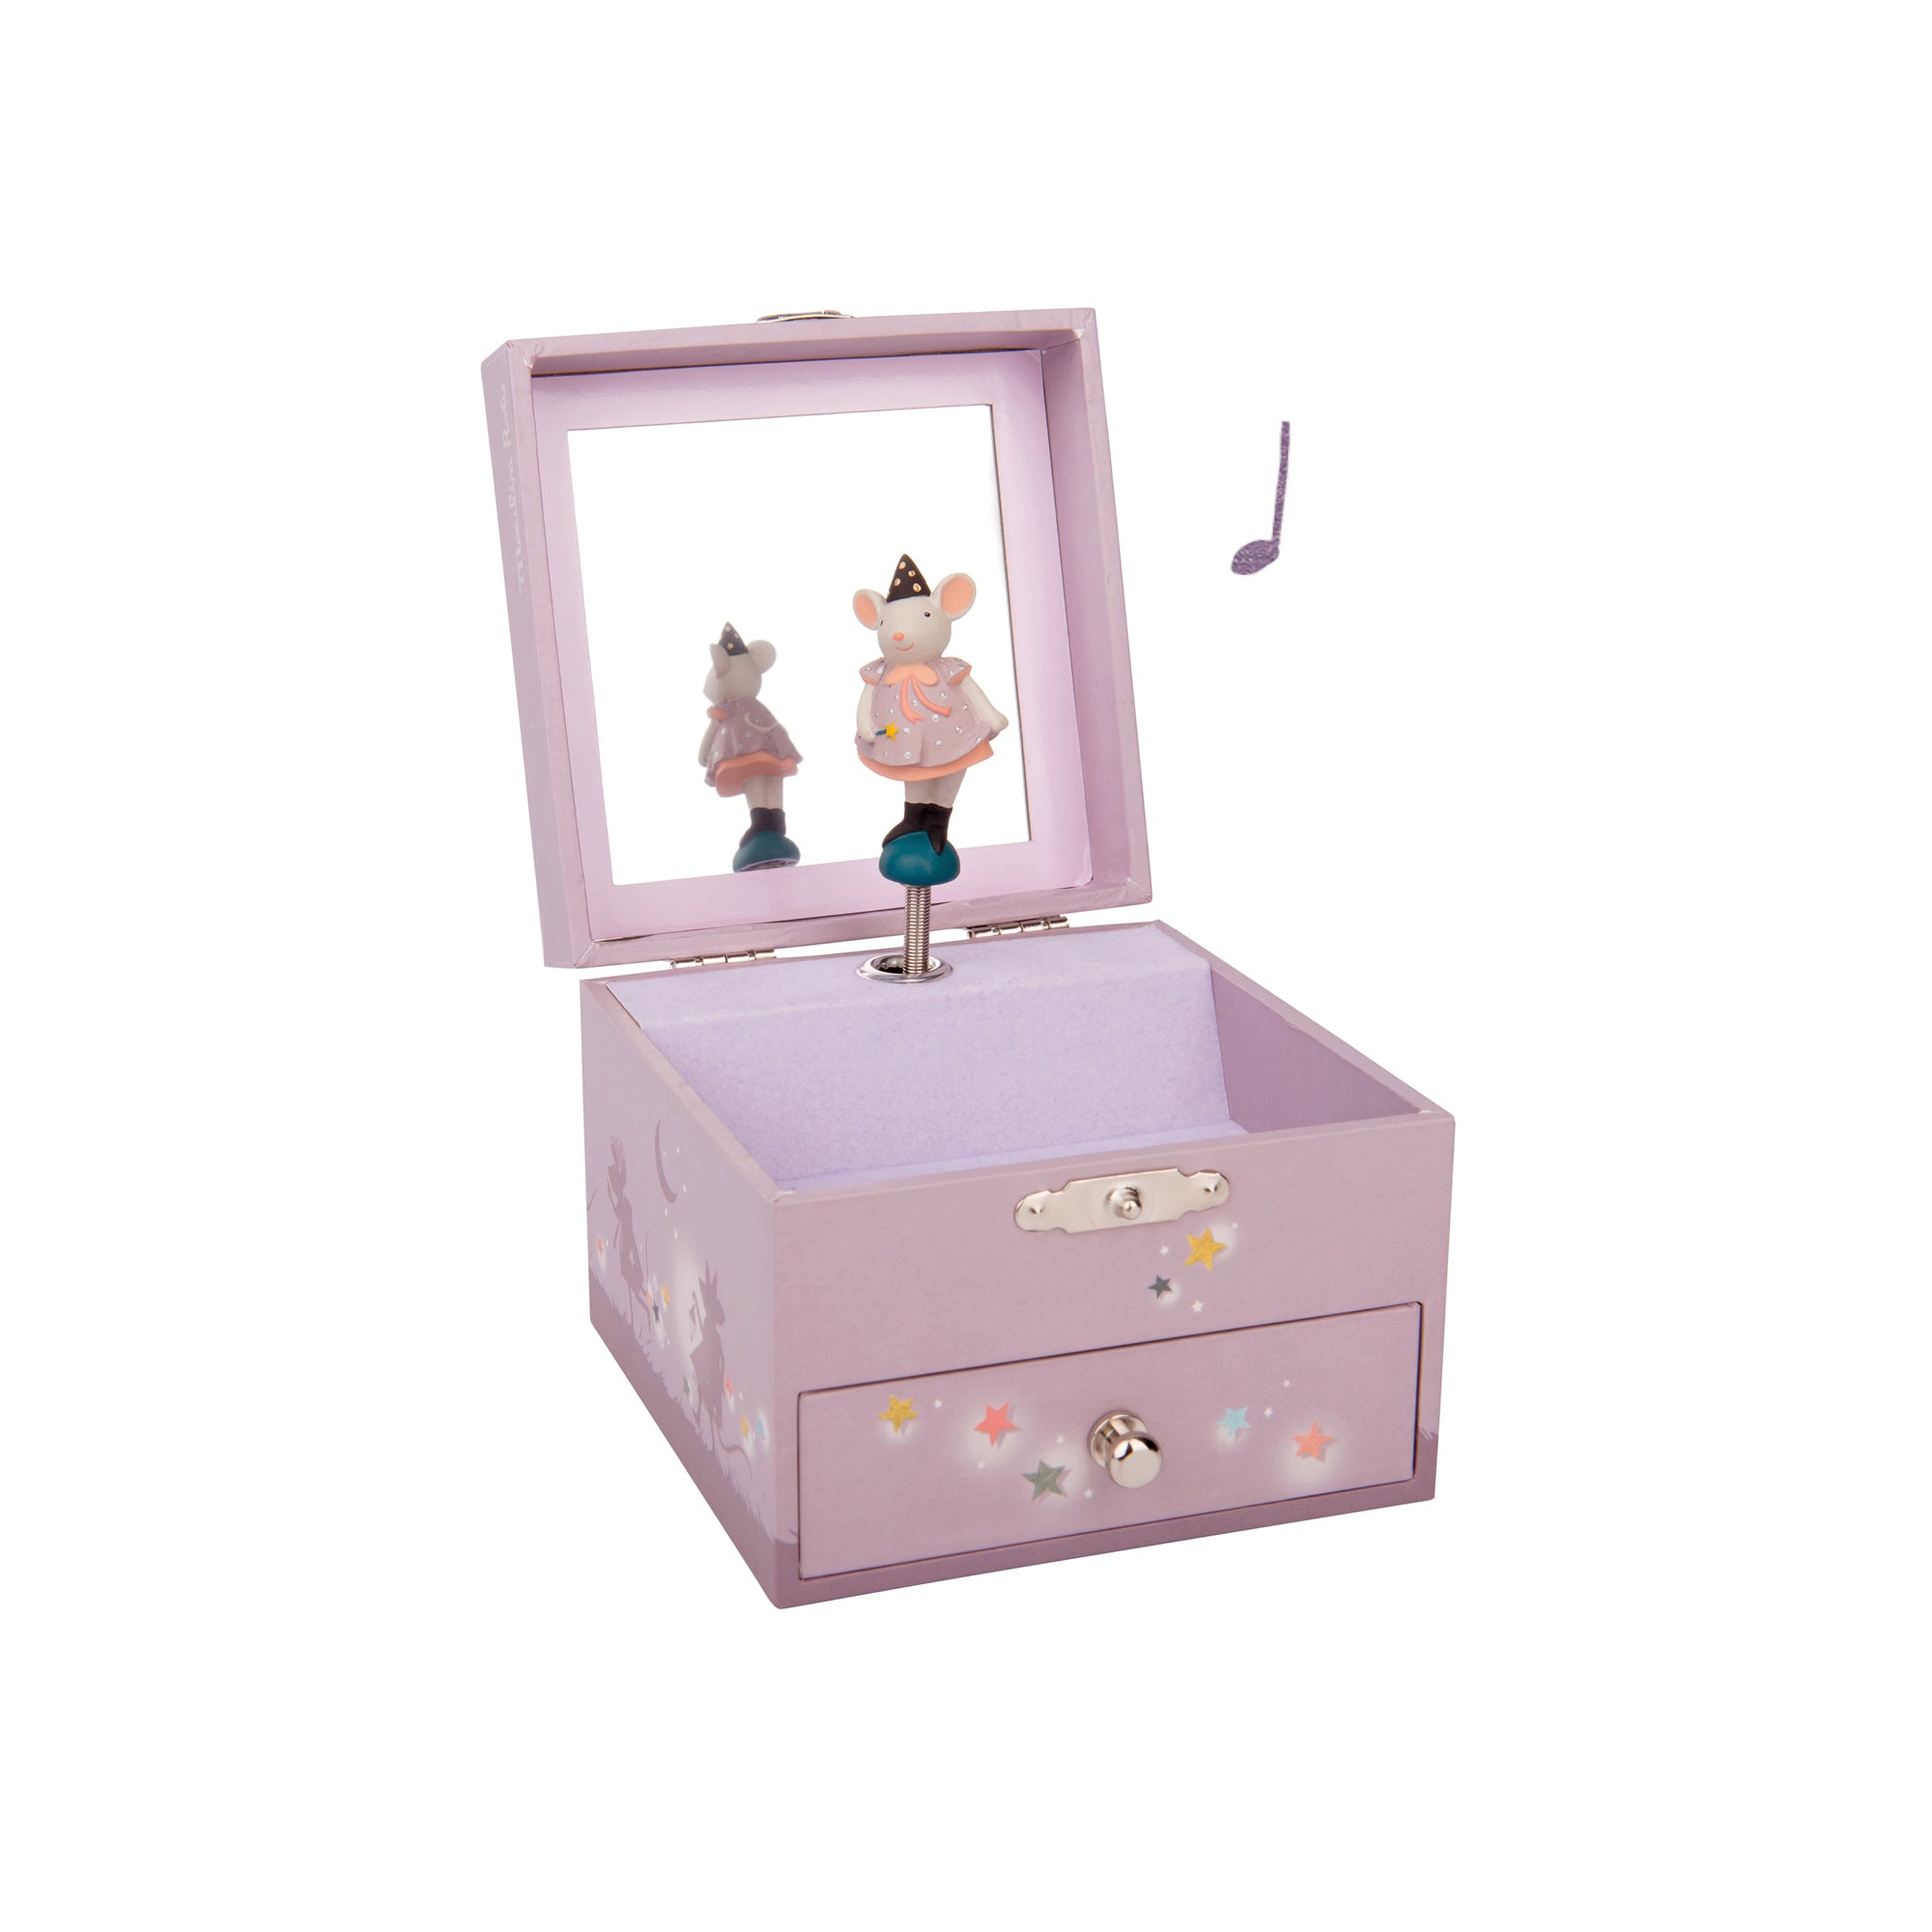 Once Upon A Time Musical Jewellery Box by Moulin Roty, available at Bobby Rabbit.